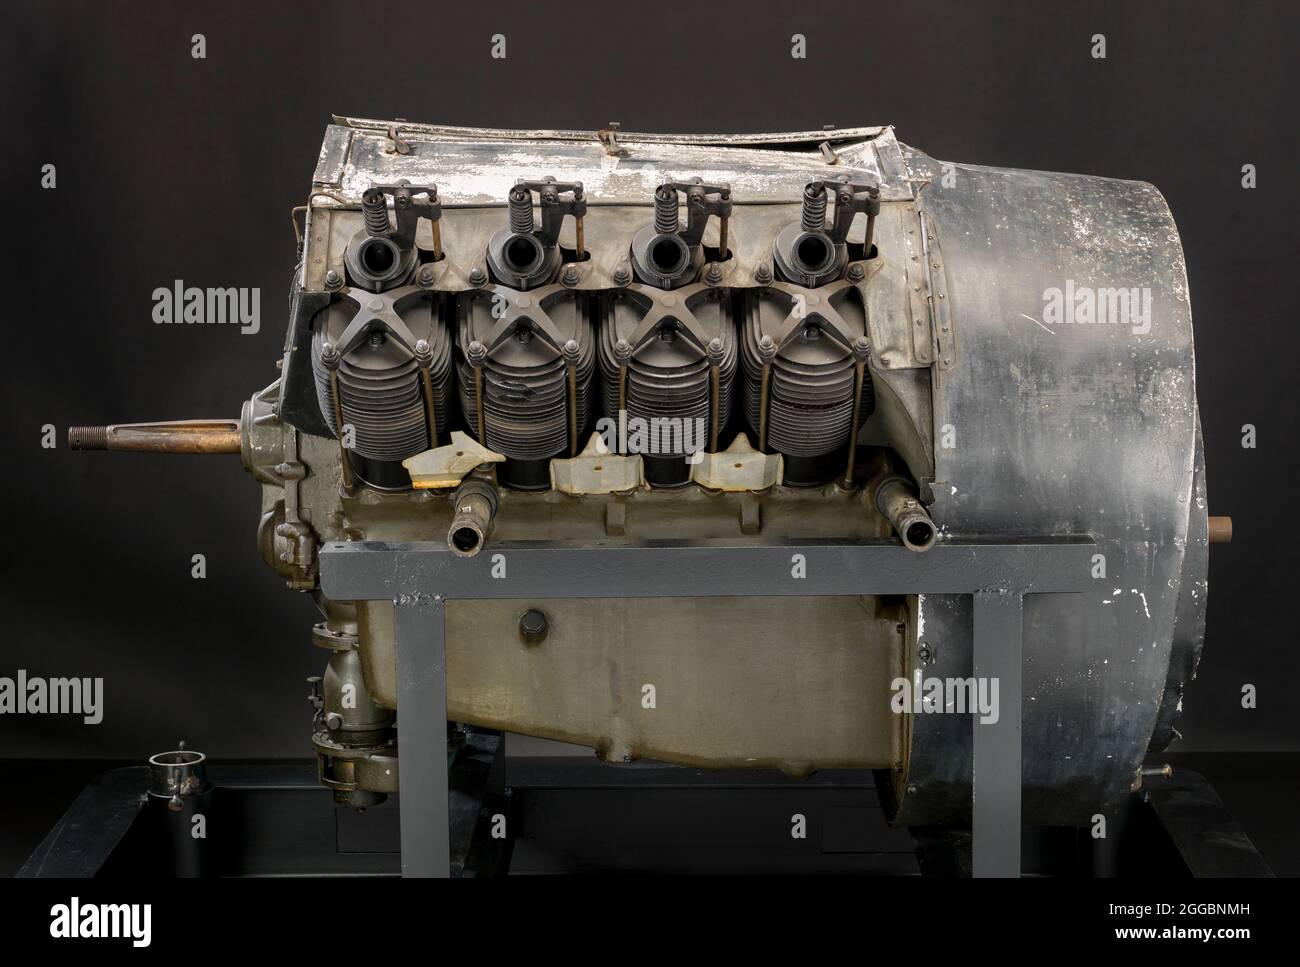 The first versions of this engine were built in 1908, and set an 8-hour endurance record in 1910. continued to be used through World War I, especially in British training planes.